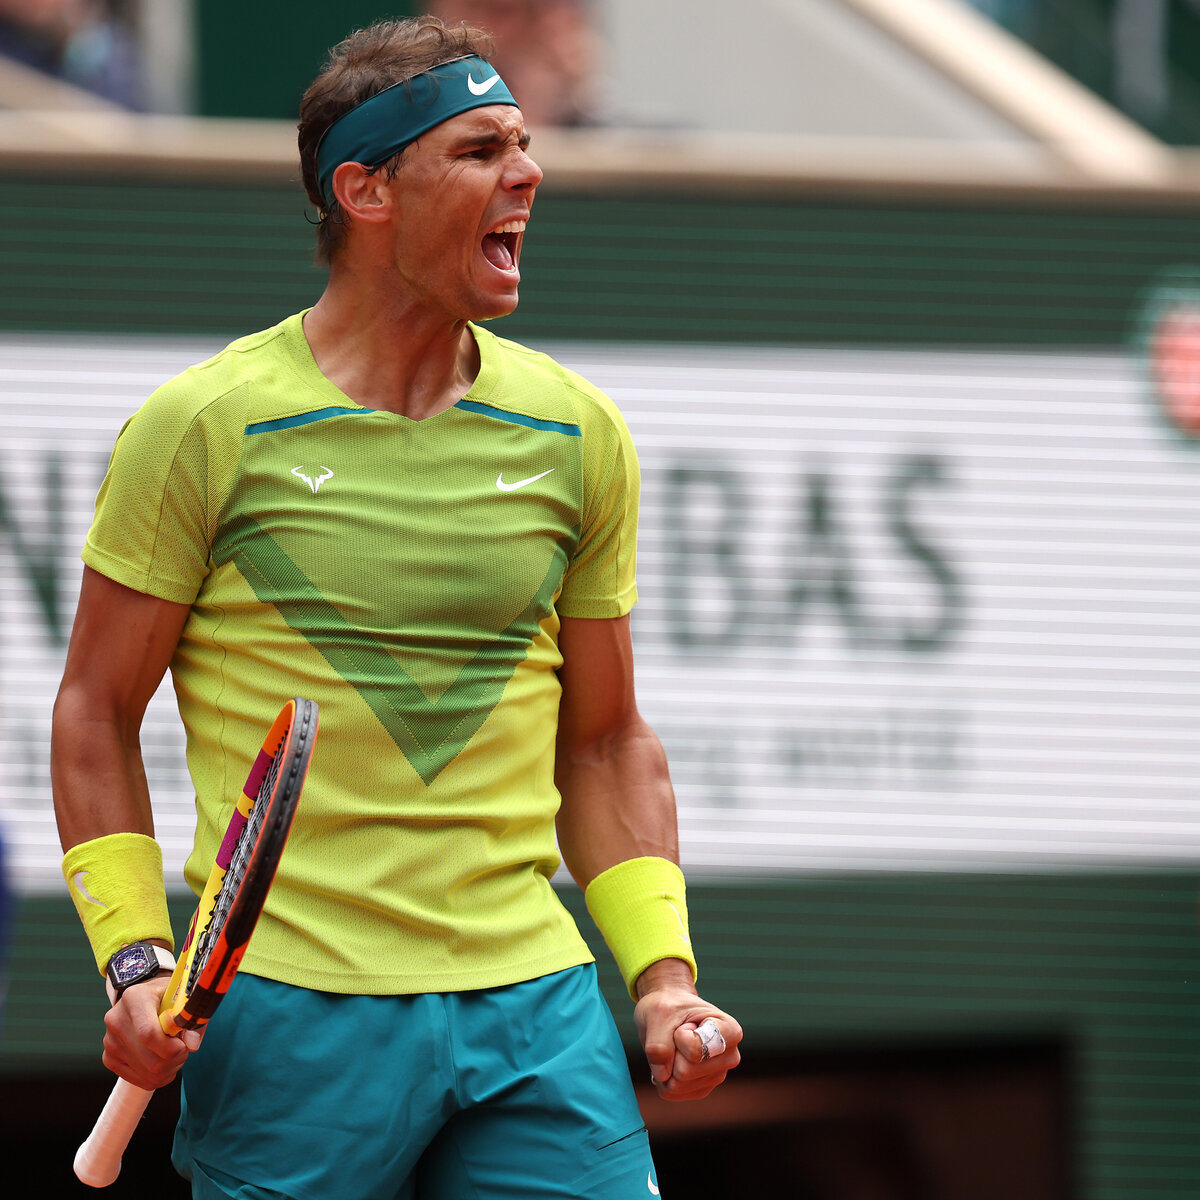 French Open 2022 Rafael Nadal has to stretch against Felix Auger-Aliassime 